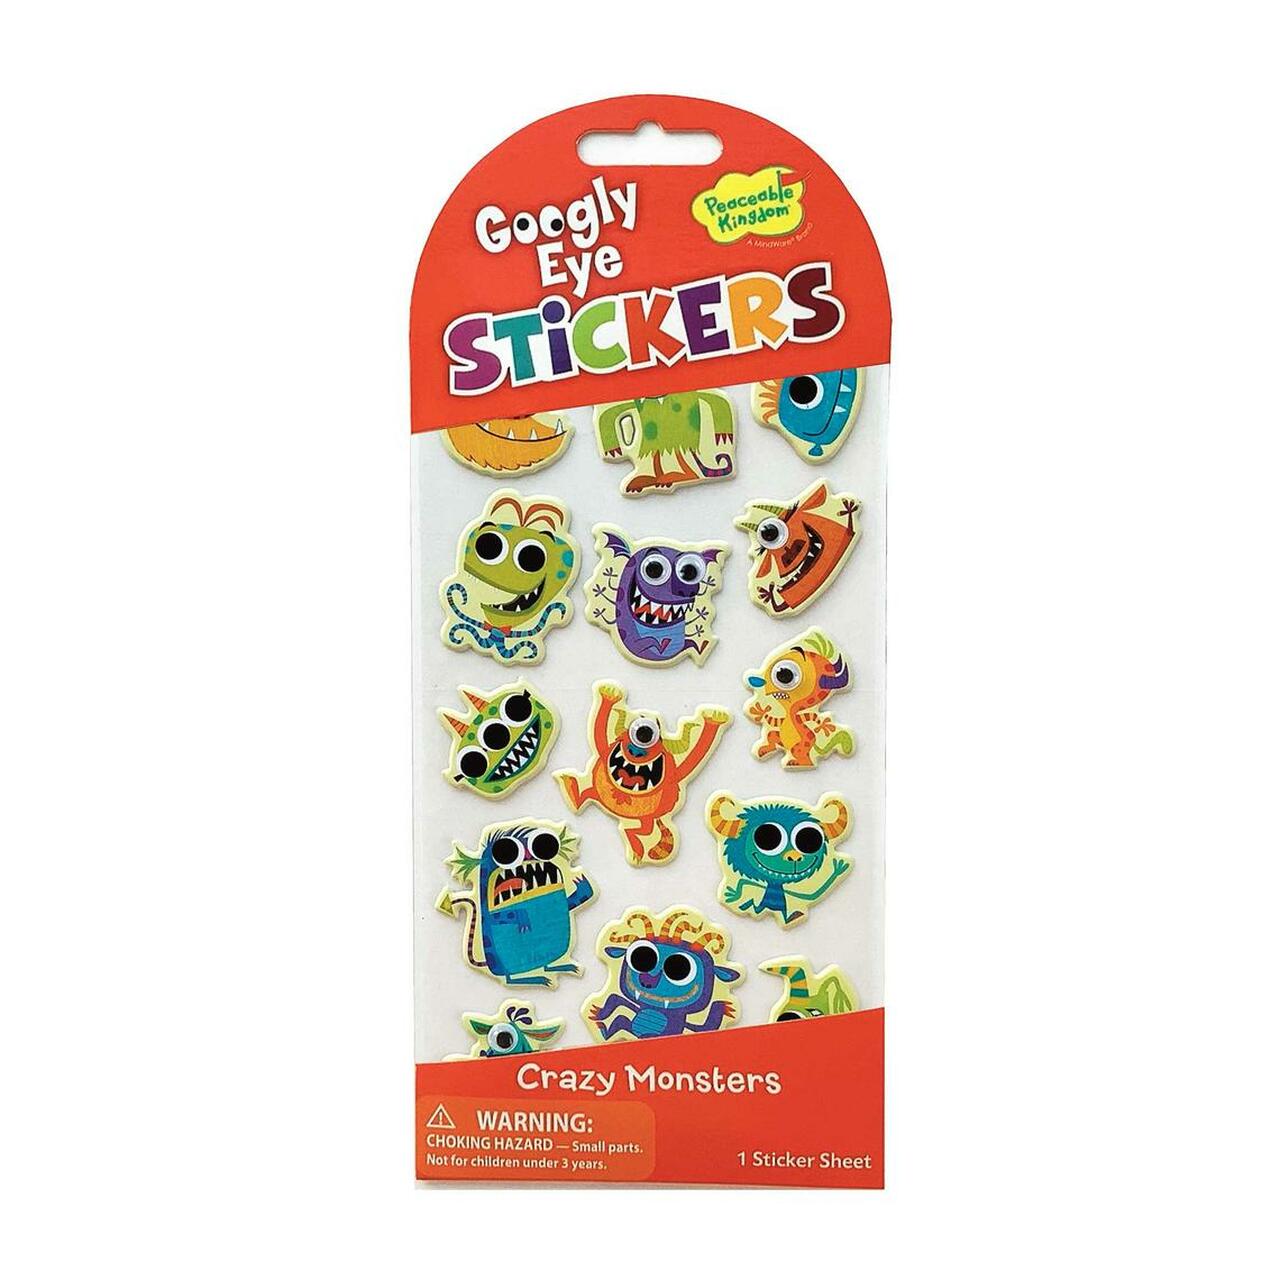 Googly Eye Crazy Monsters Stickers – Awesome Toys Gifts